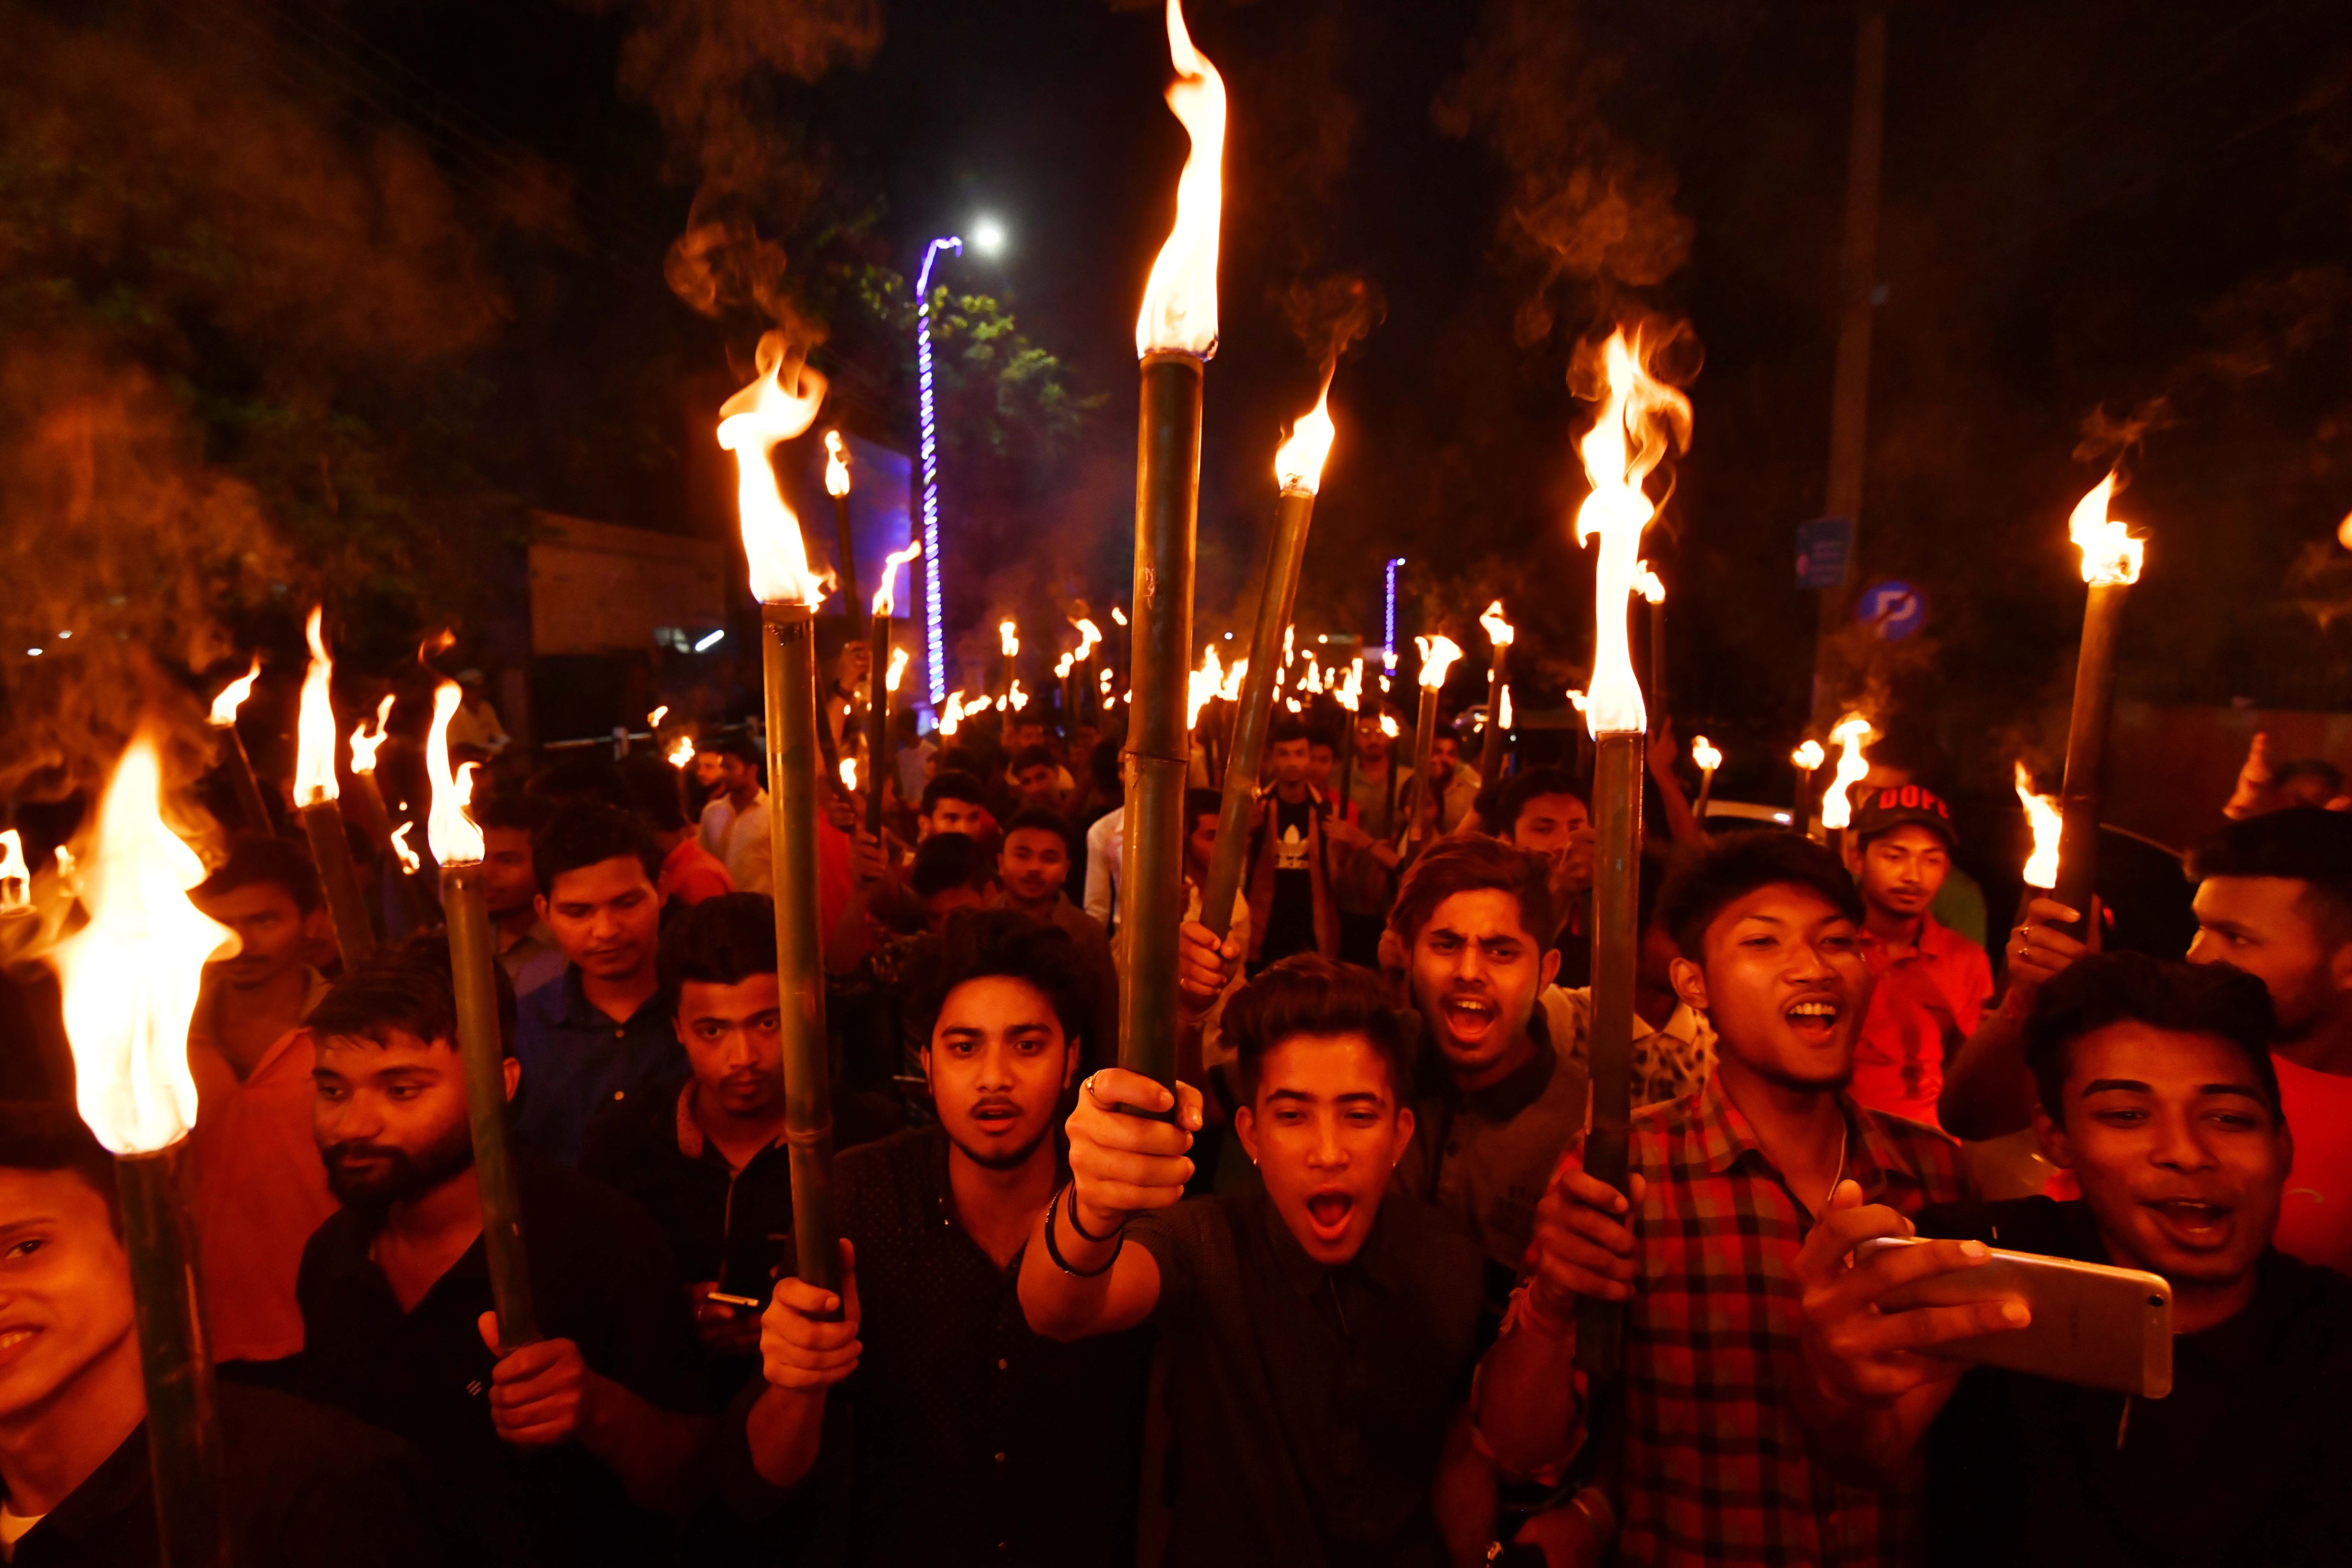 Activists of All Assam Students' Union (AASU) take part in a torch light procession in protest against the Citizenship (Amendment) Bill 2016 proposal to provide citizenship or stay rights to minorities from Bangladesh, Pakistan and Afghanistan in India, in Guwahati on May 14, 2018. (Biju Boro—AFP/Getty Images)